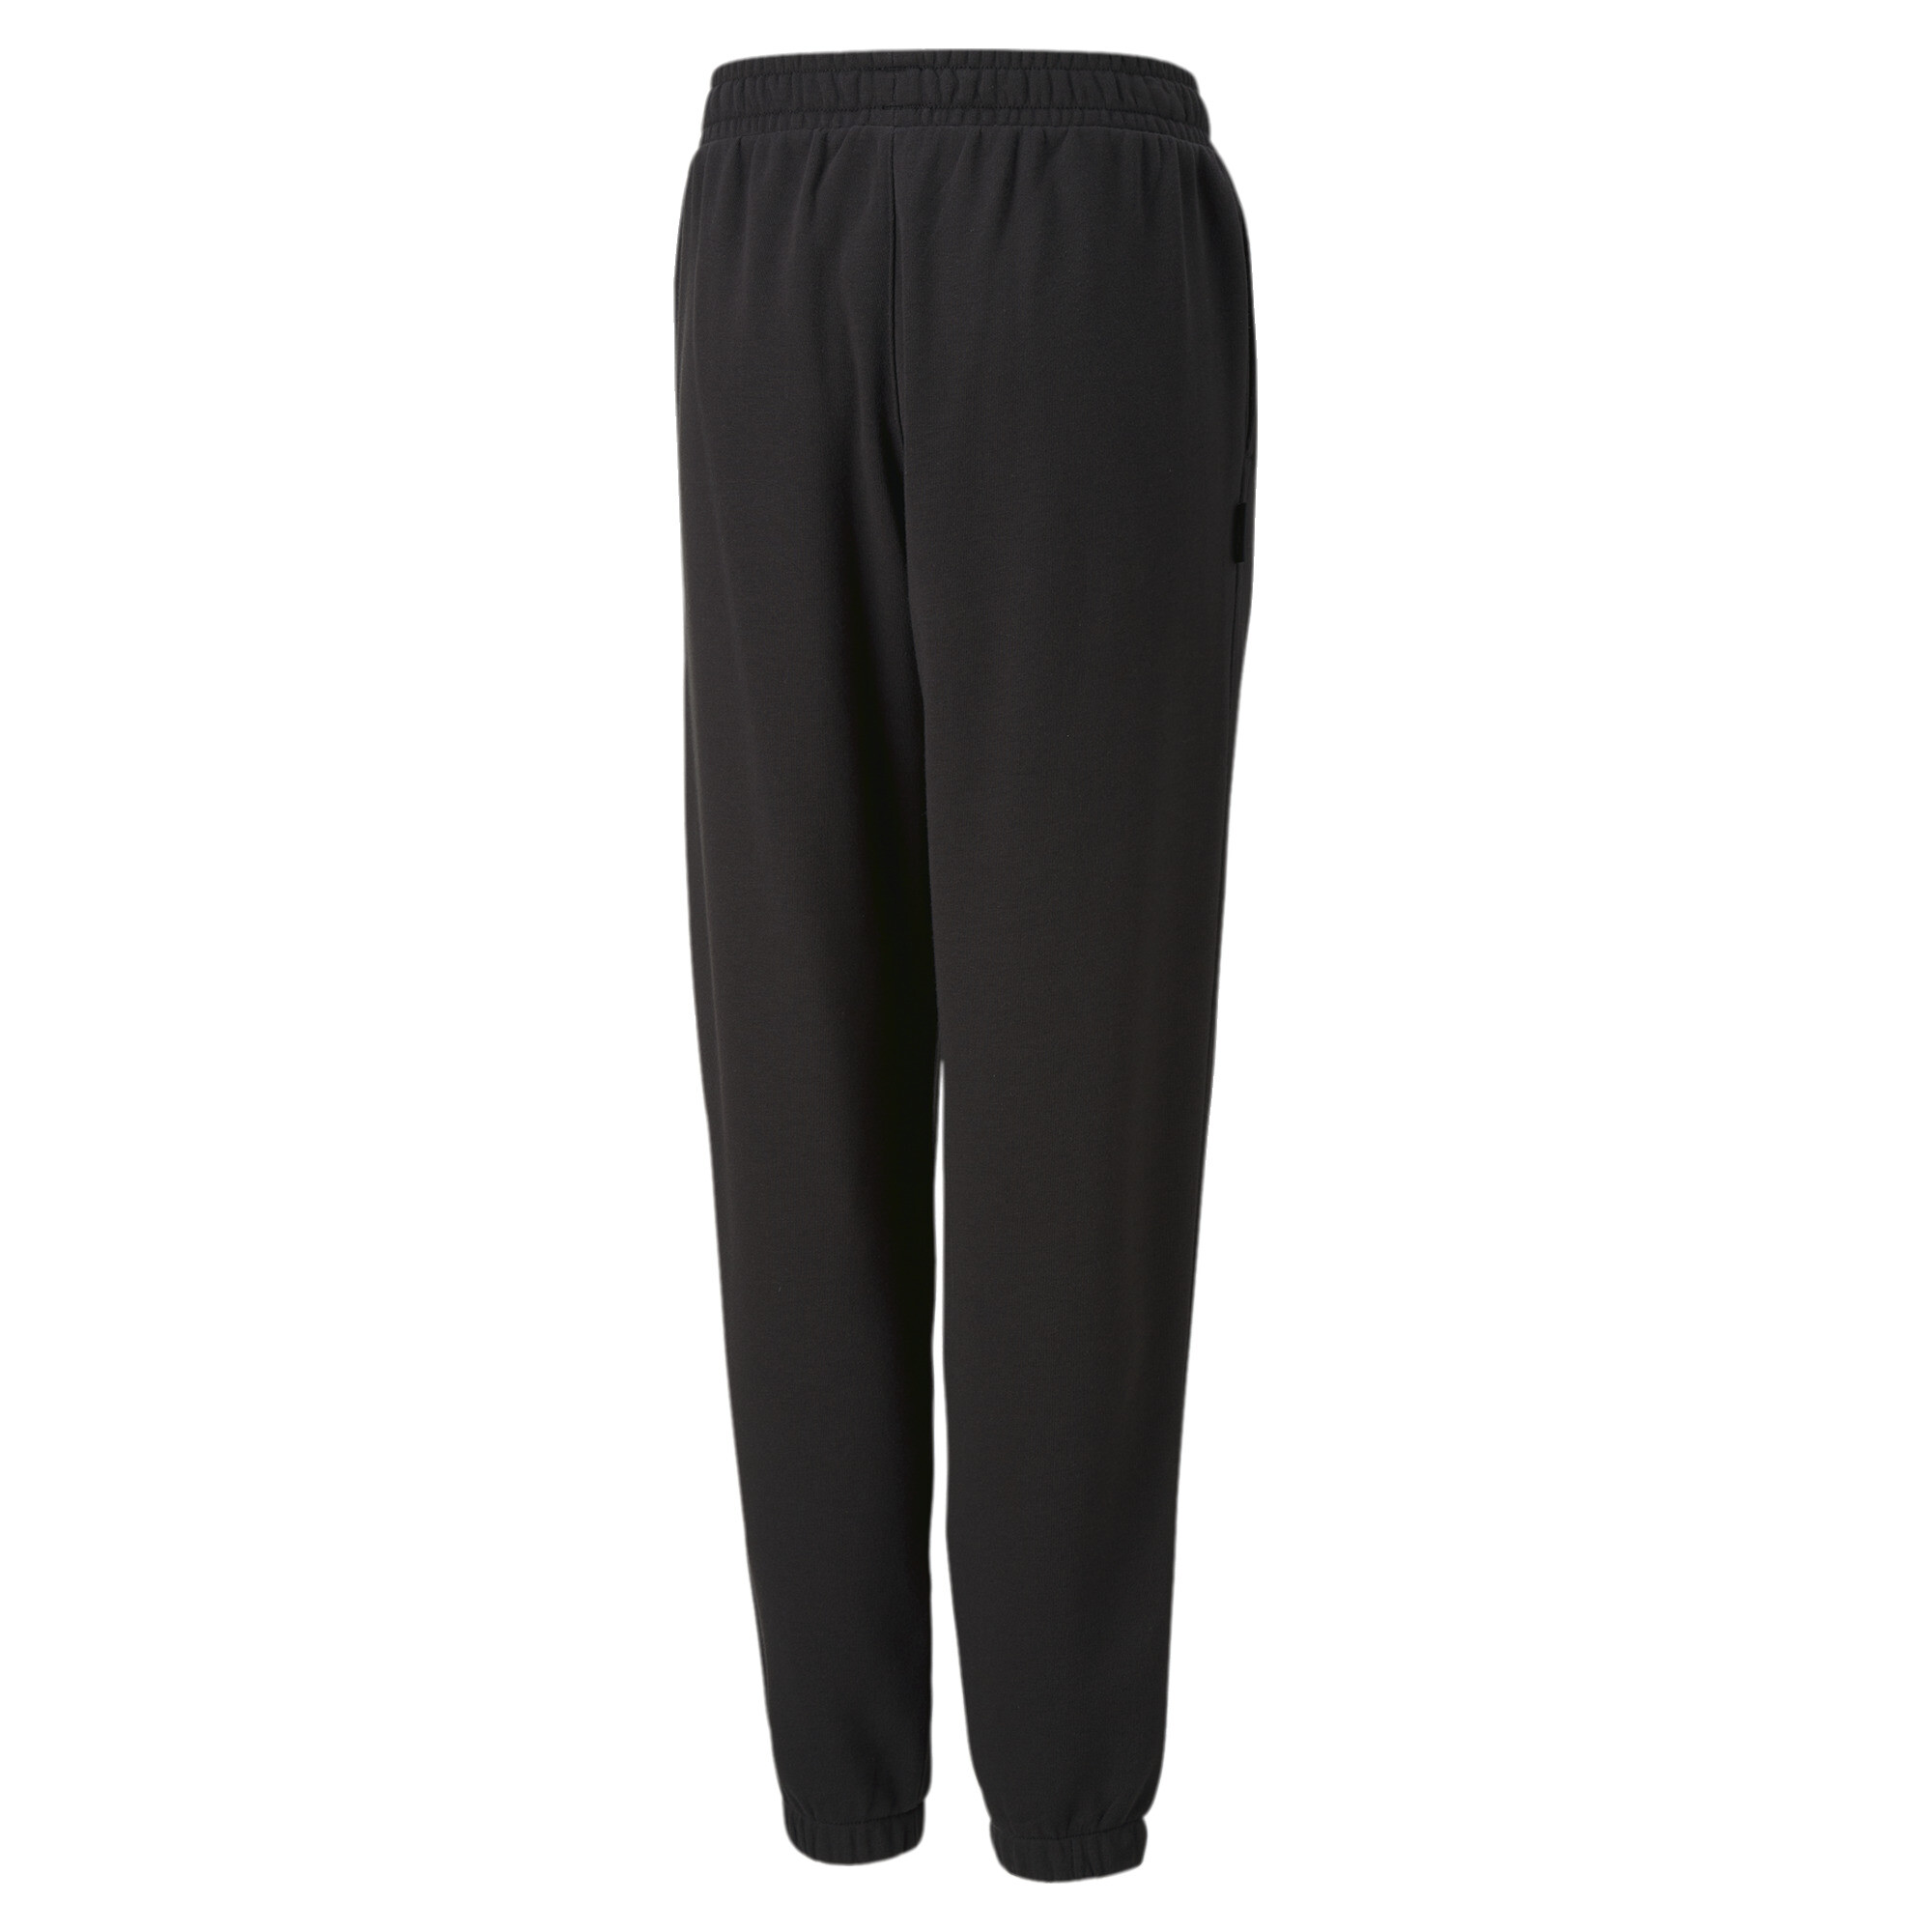 PUMA Downtown Sweatpants In Black, Size 9-10 Youth